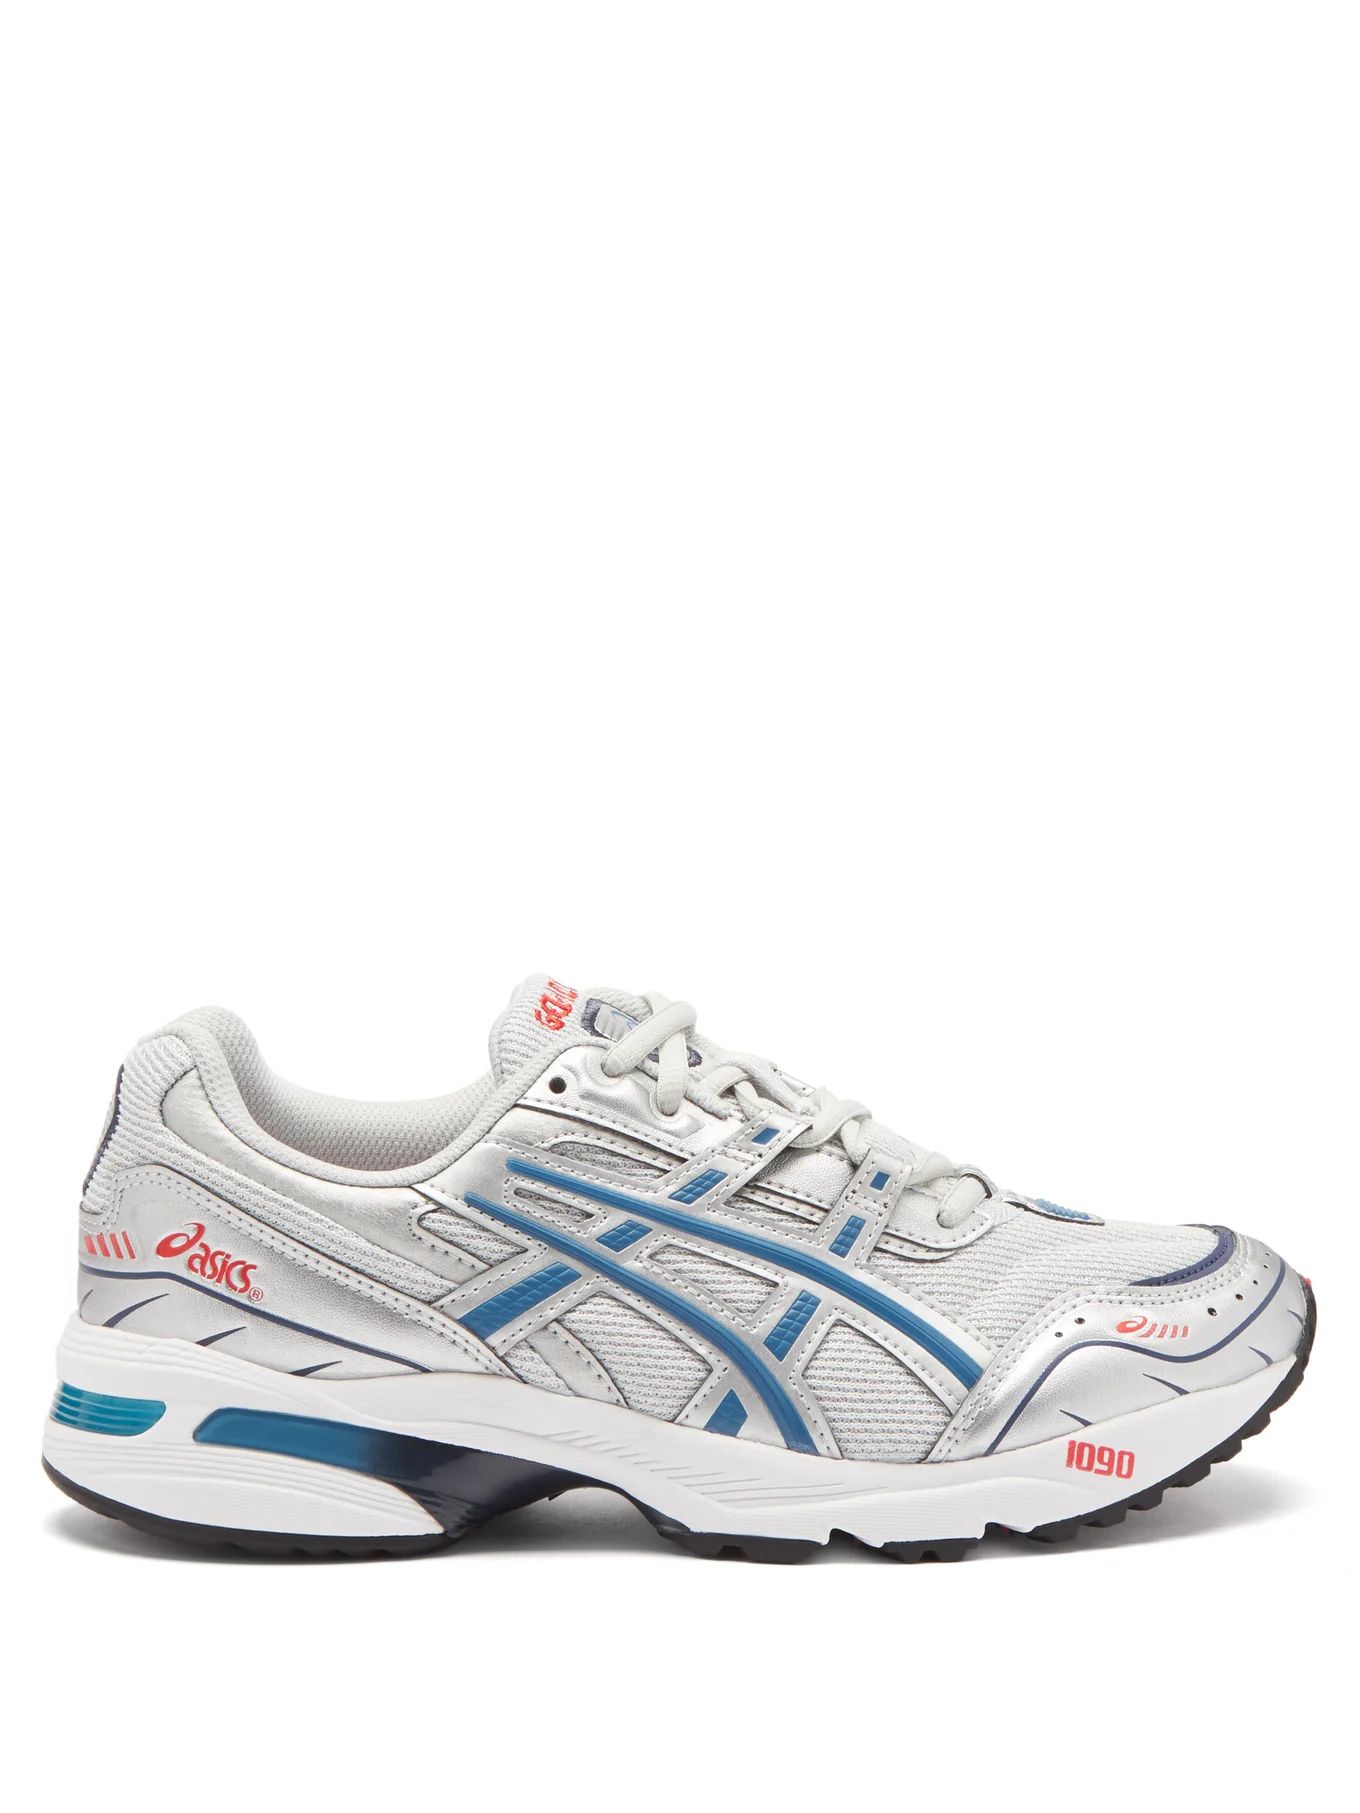 Gel-1090 running trainers | Matches (US)